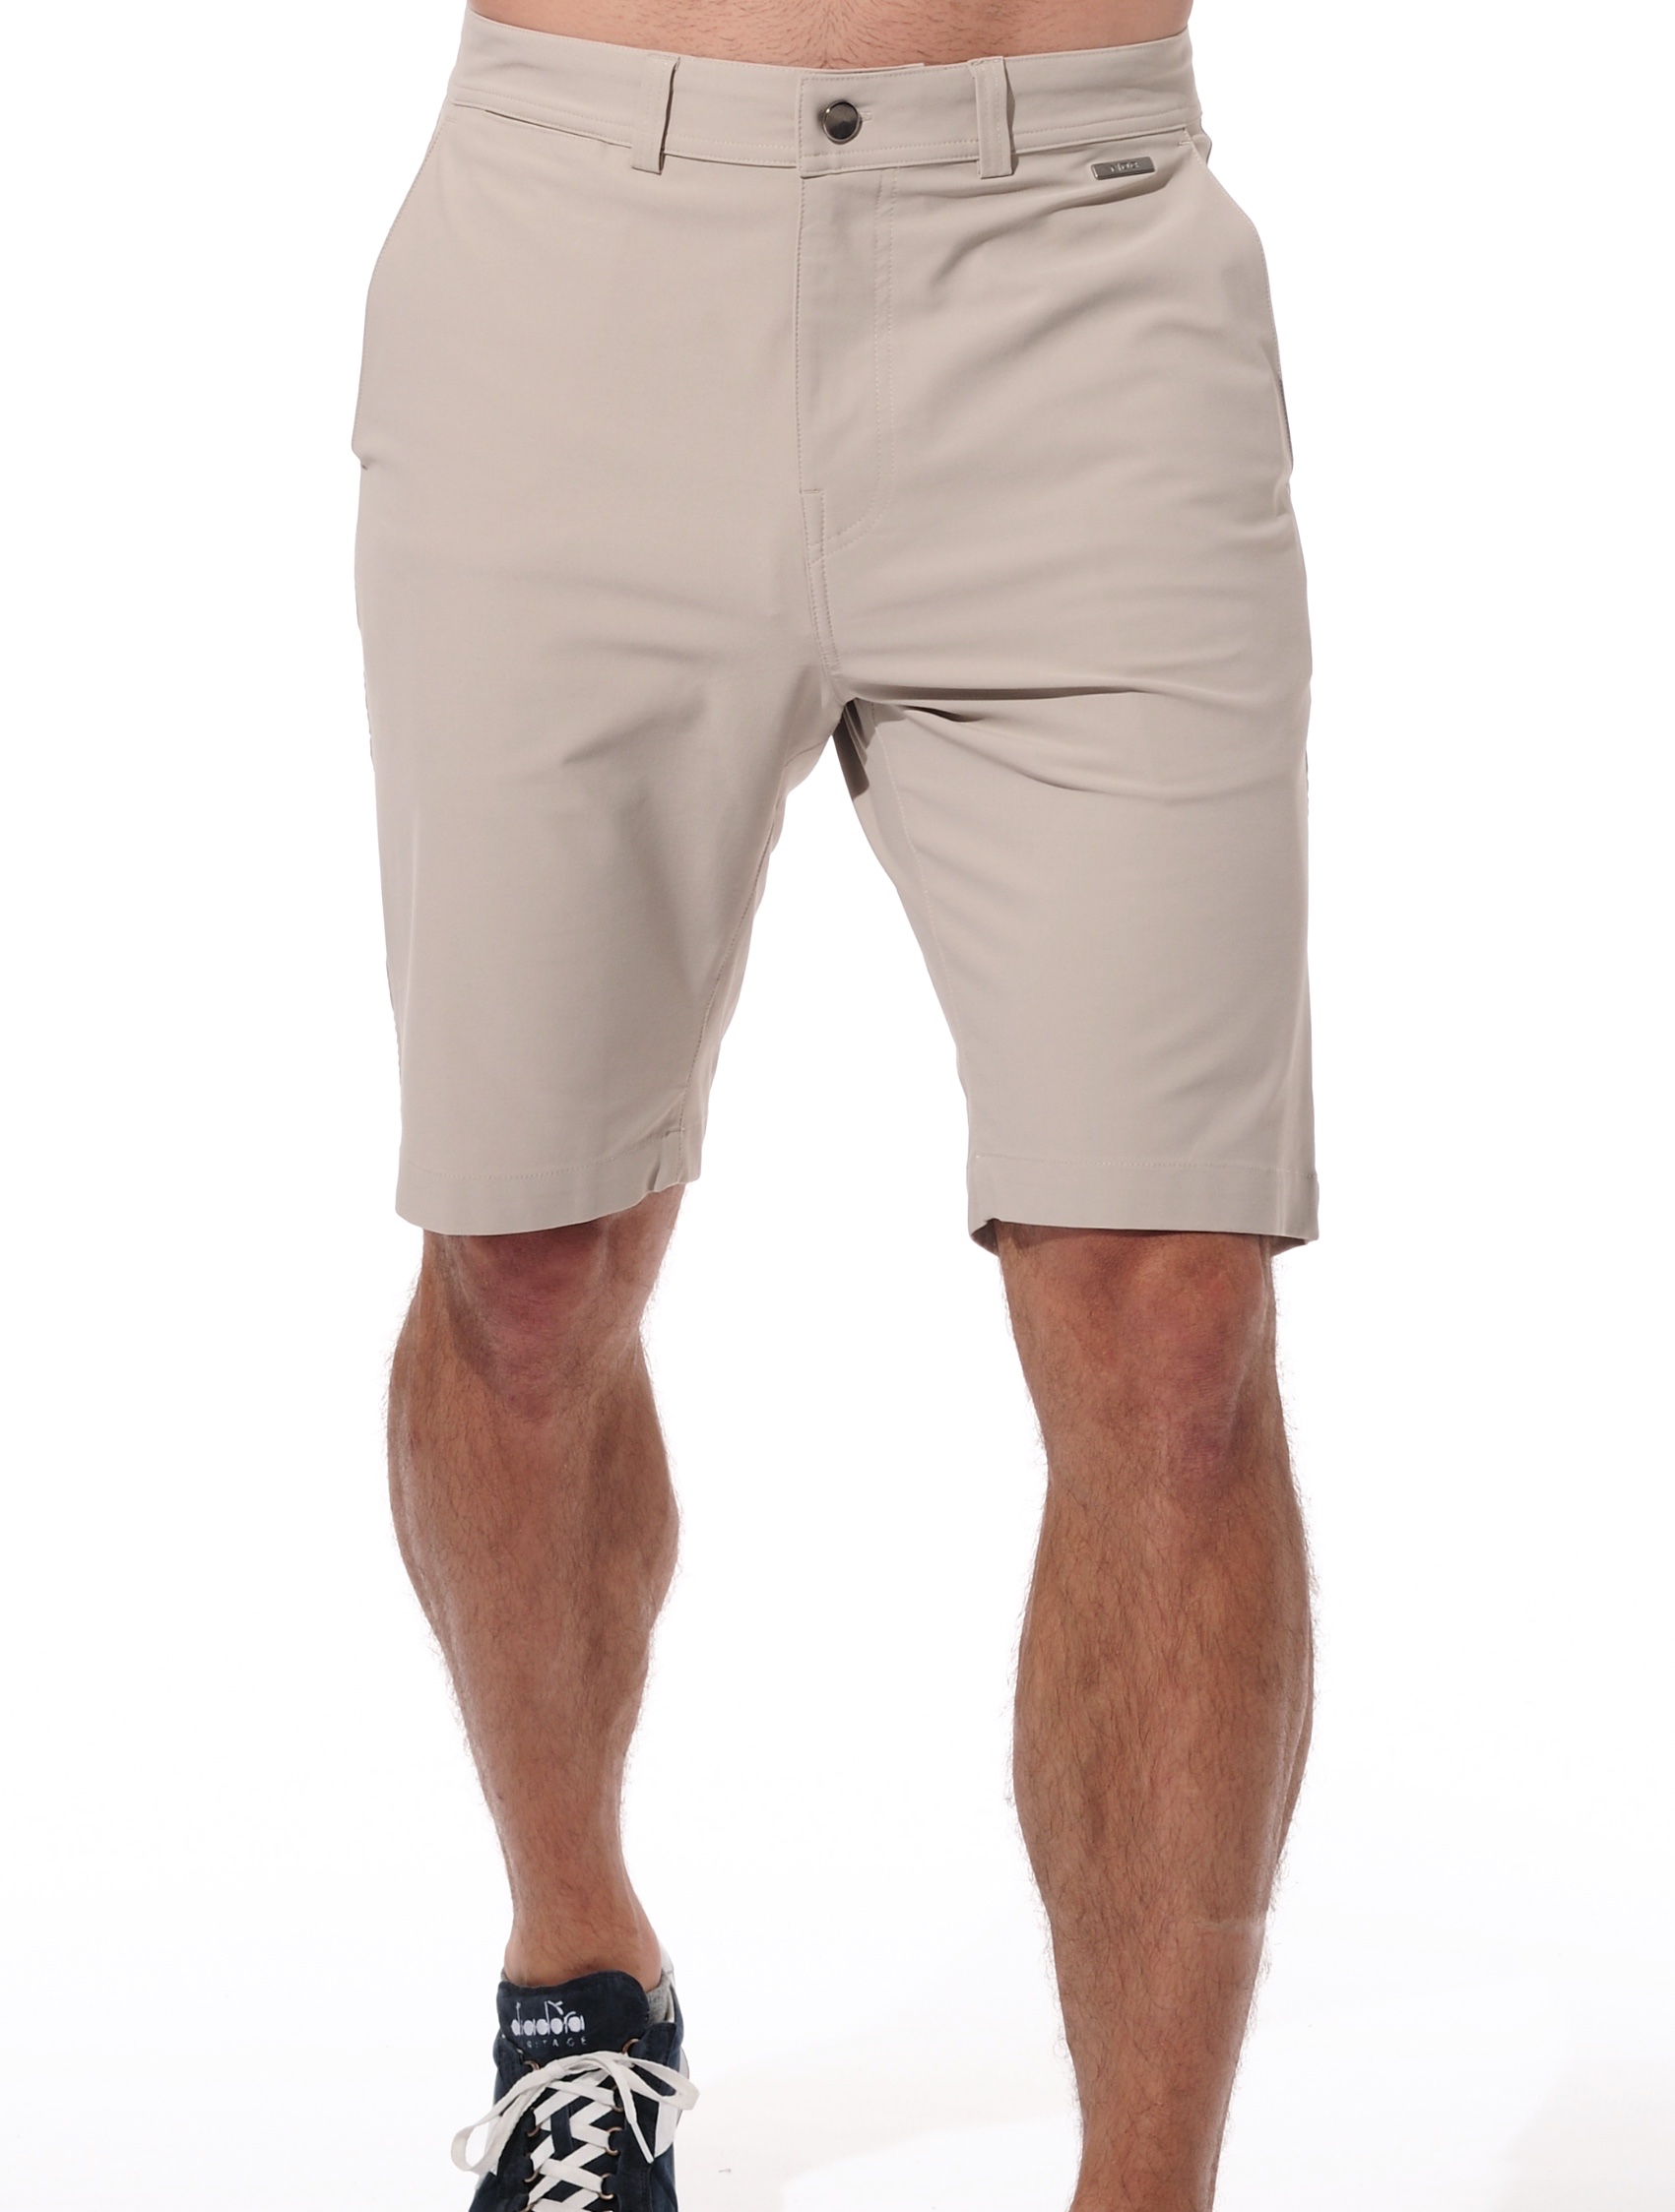 4way stretch shorts light taupe 